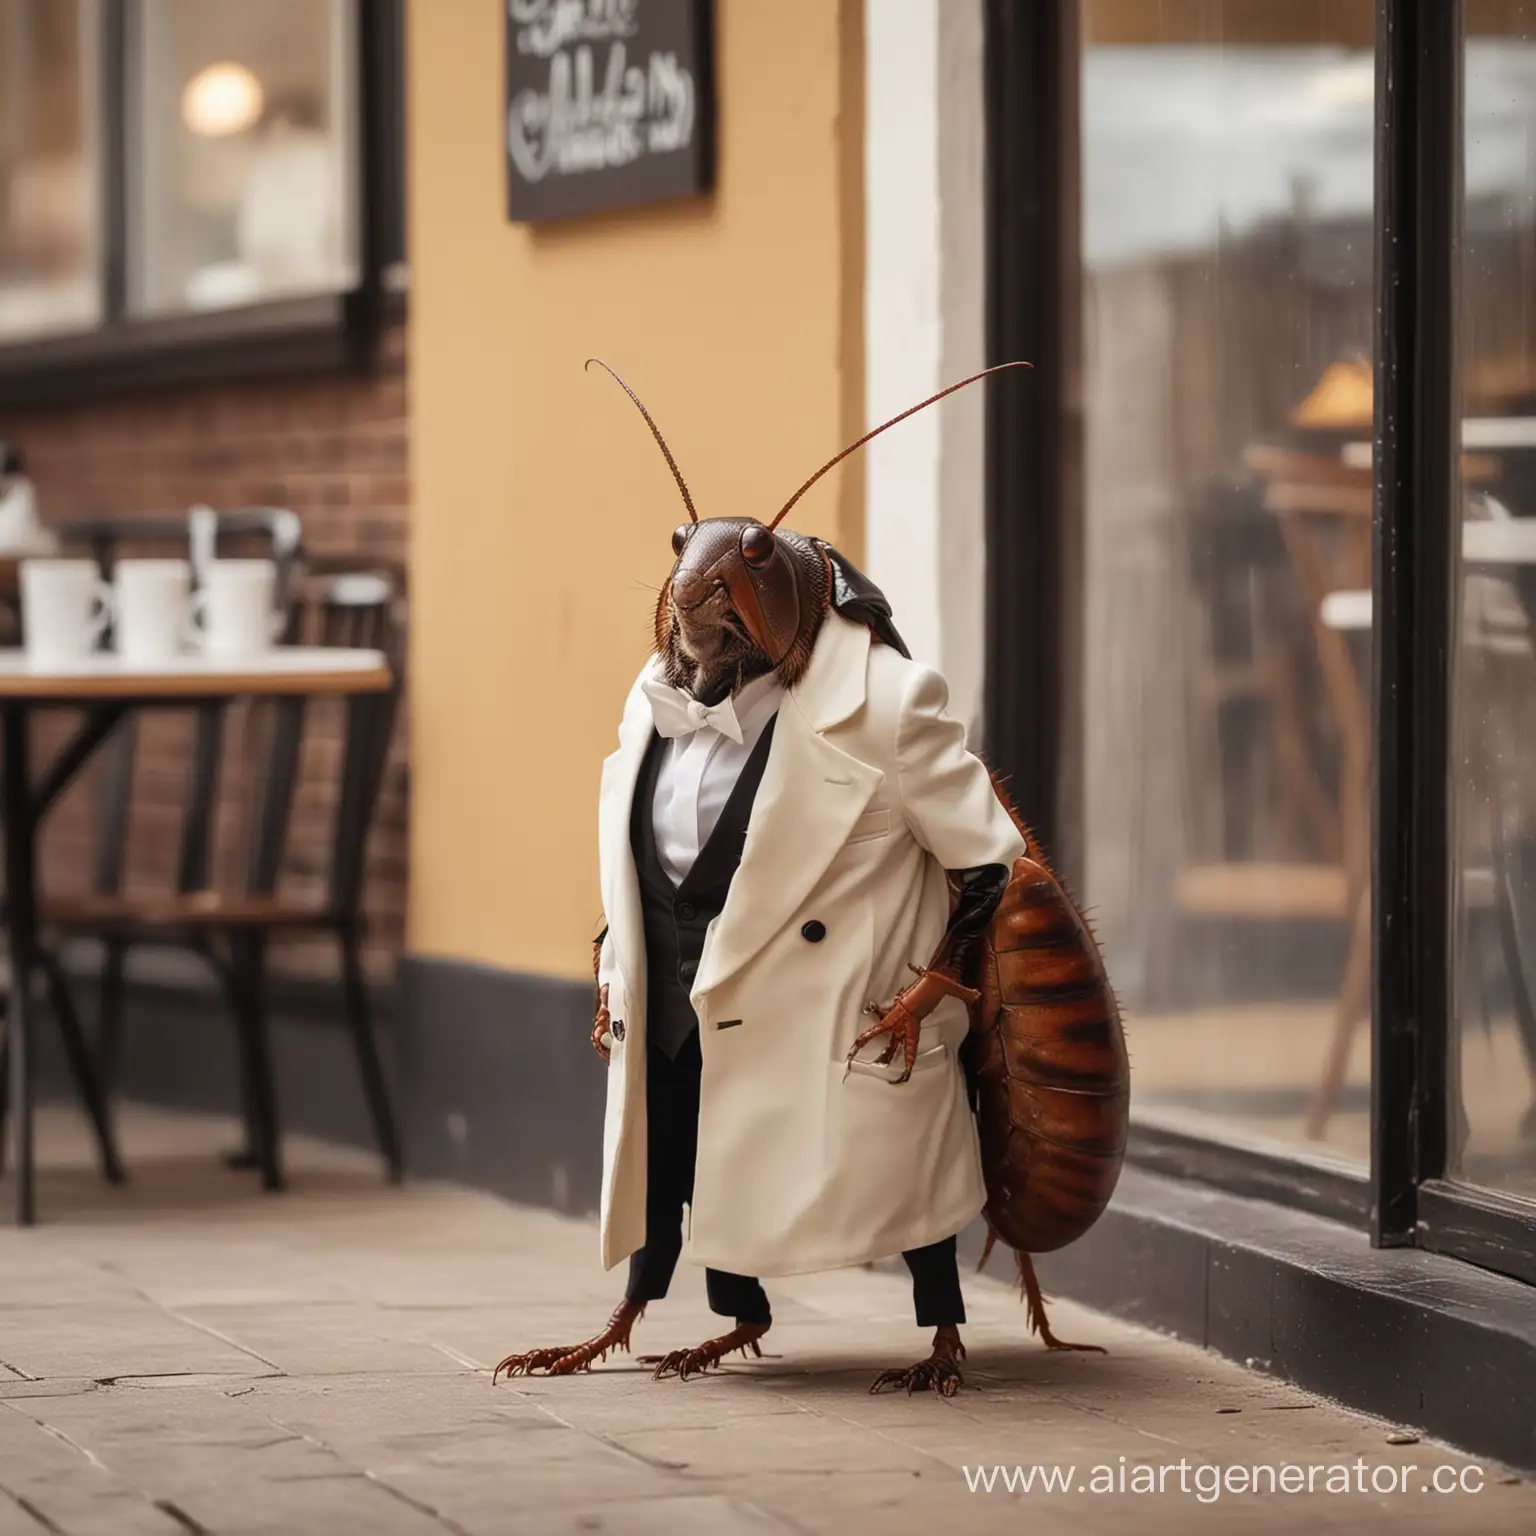 Dapper-Cockroach-Entering-a-Sophisticated-Cafe